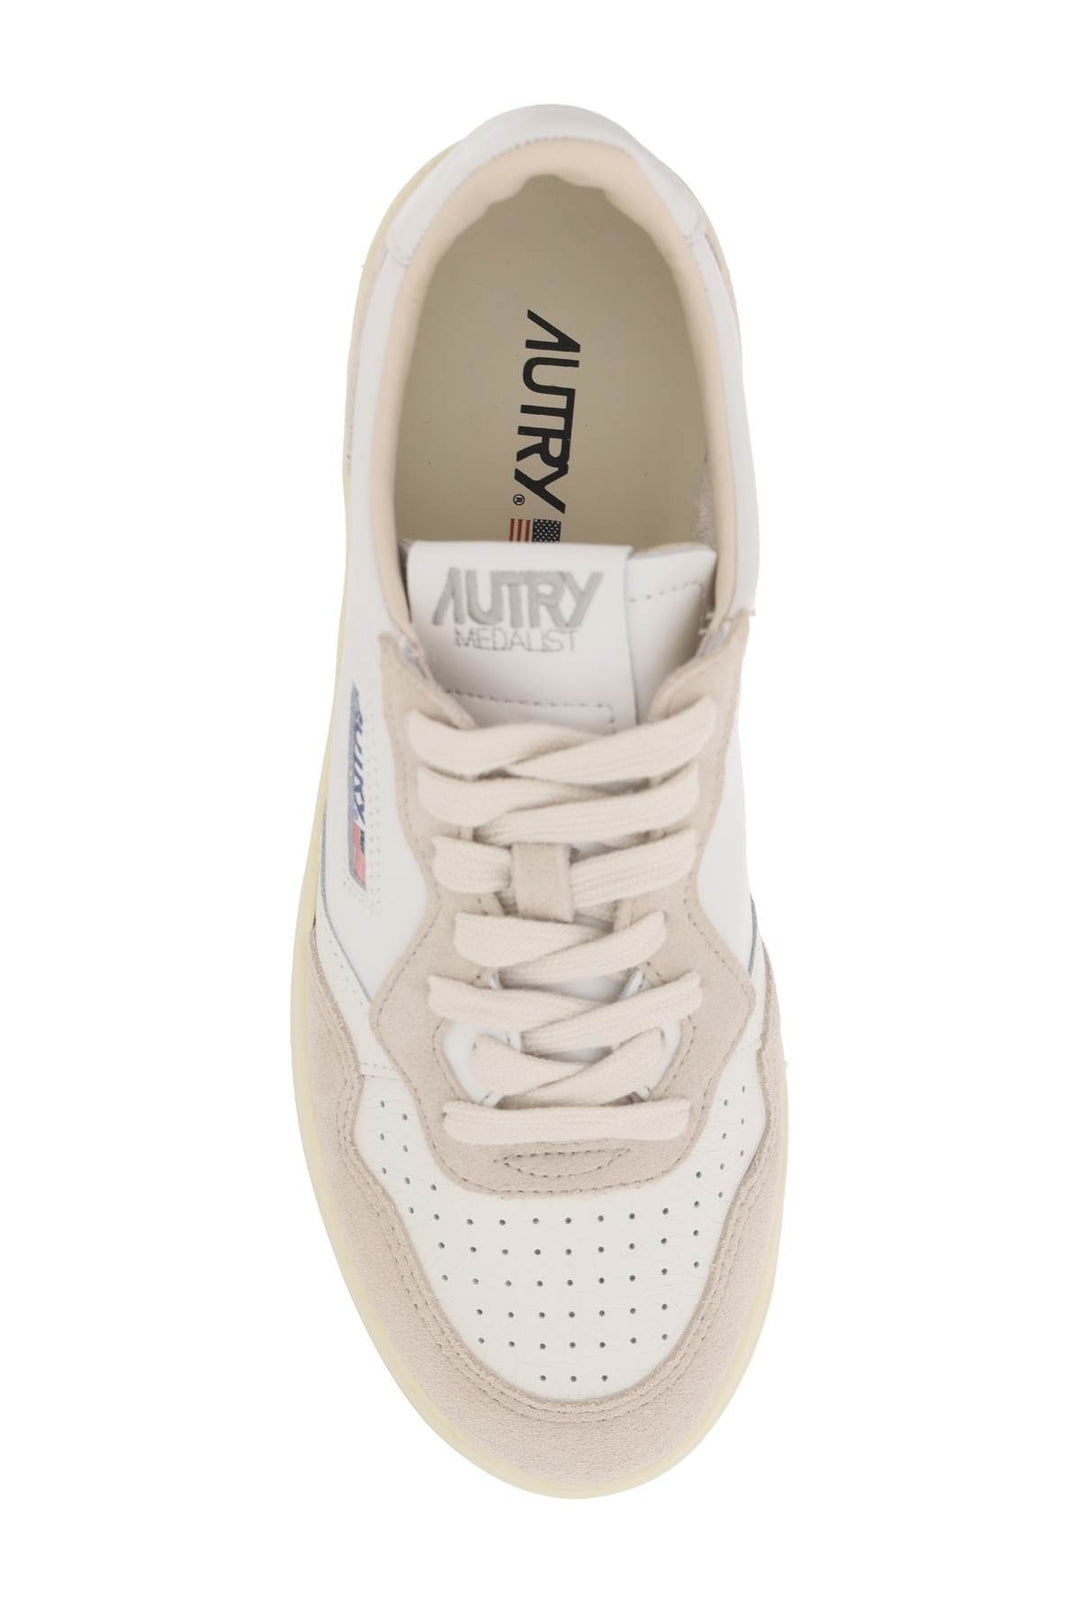 Autry Leather Medalist Low Sneakers   Beige